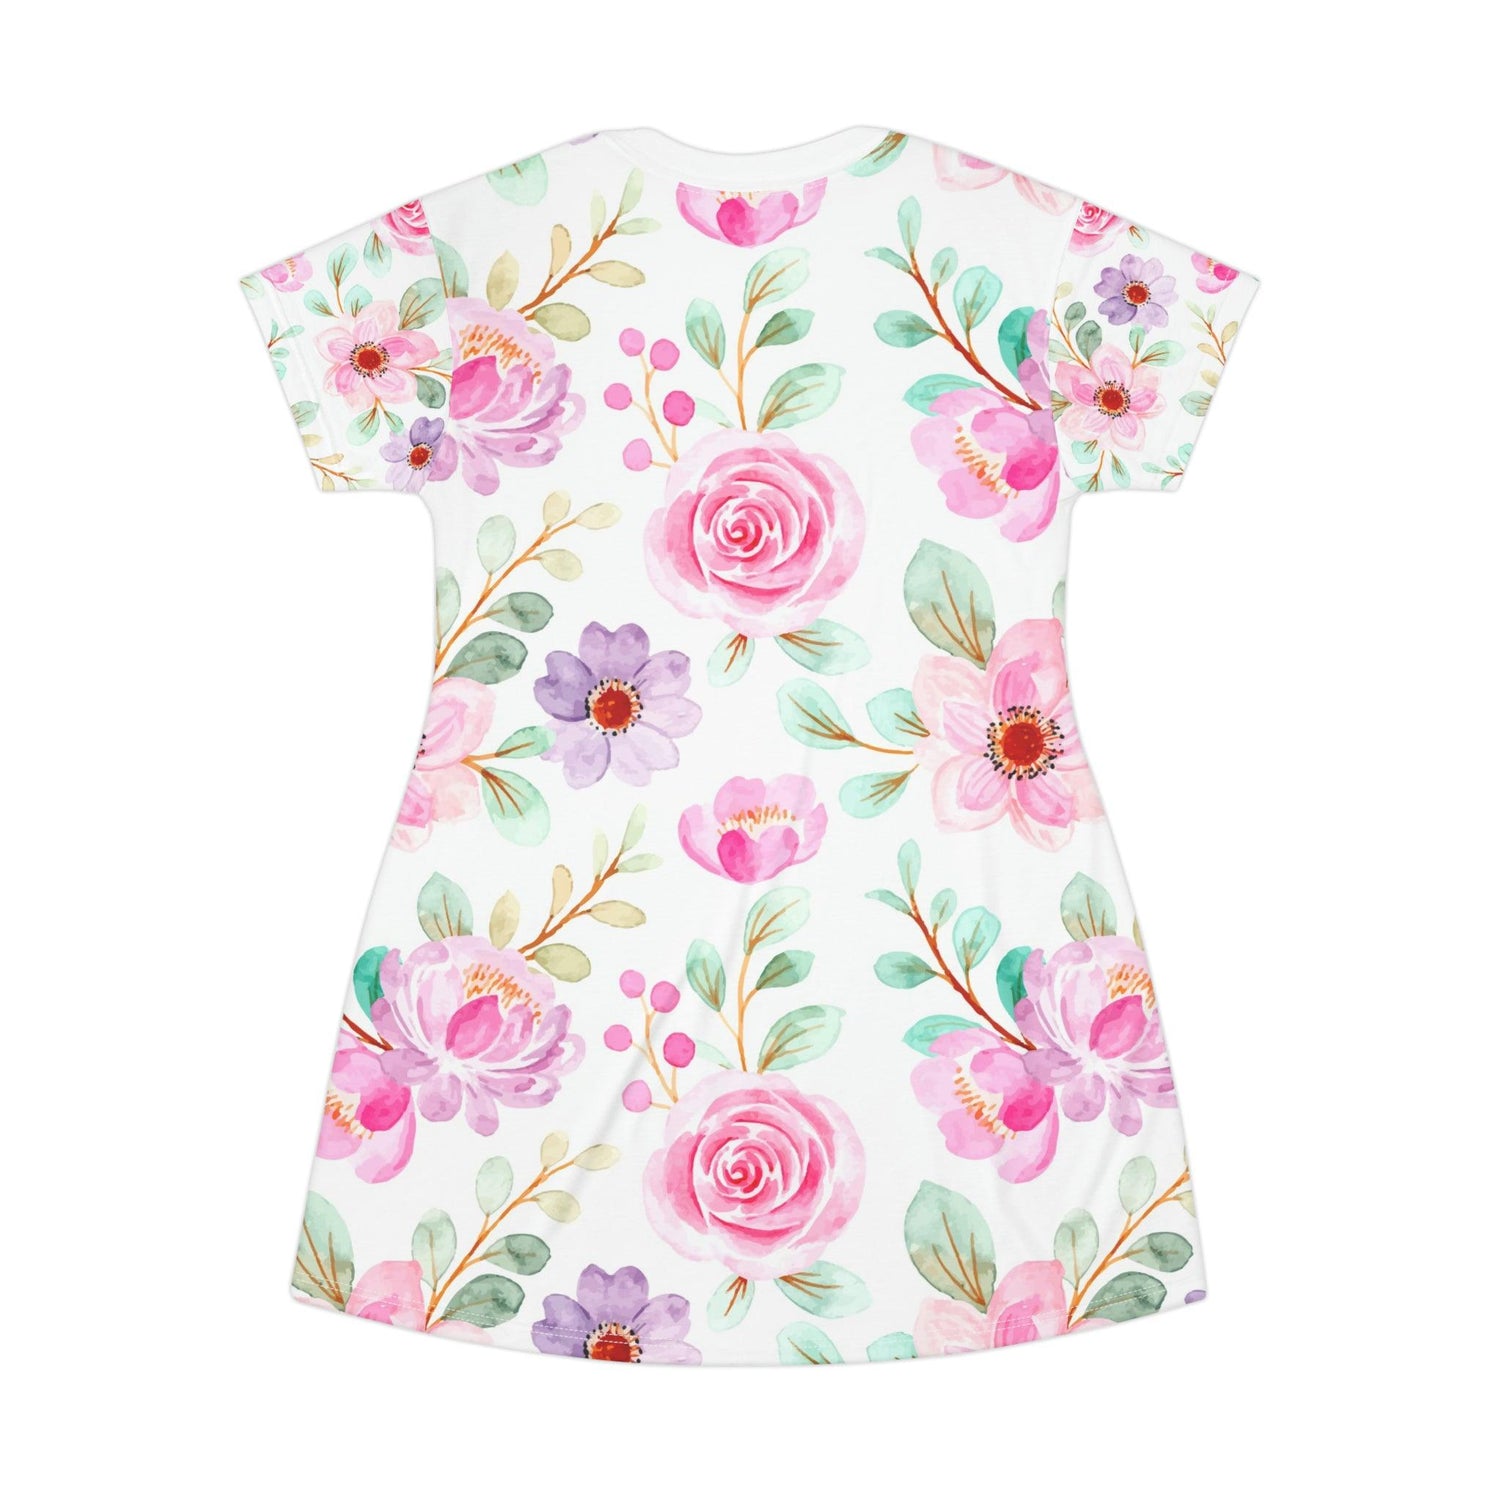 One of a Kind Pink Floral T-Shirt Dress